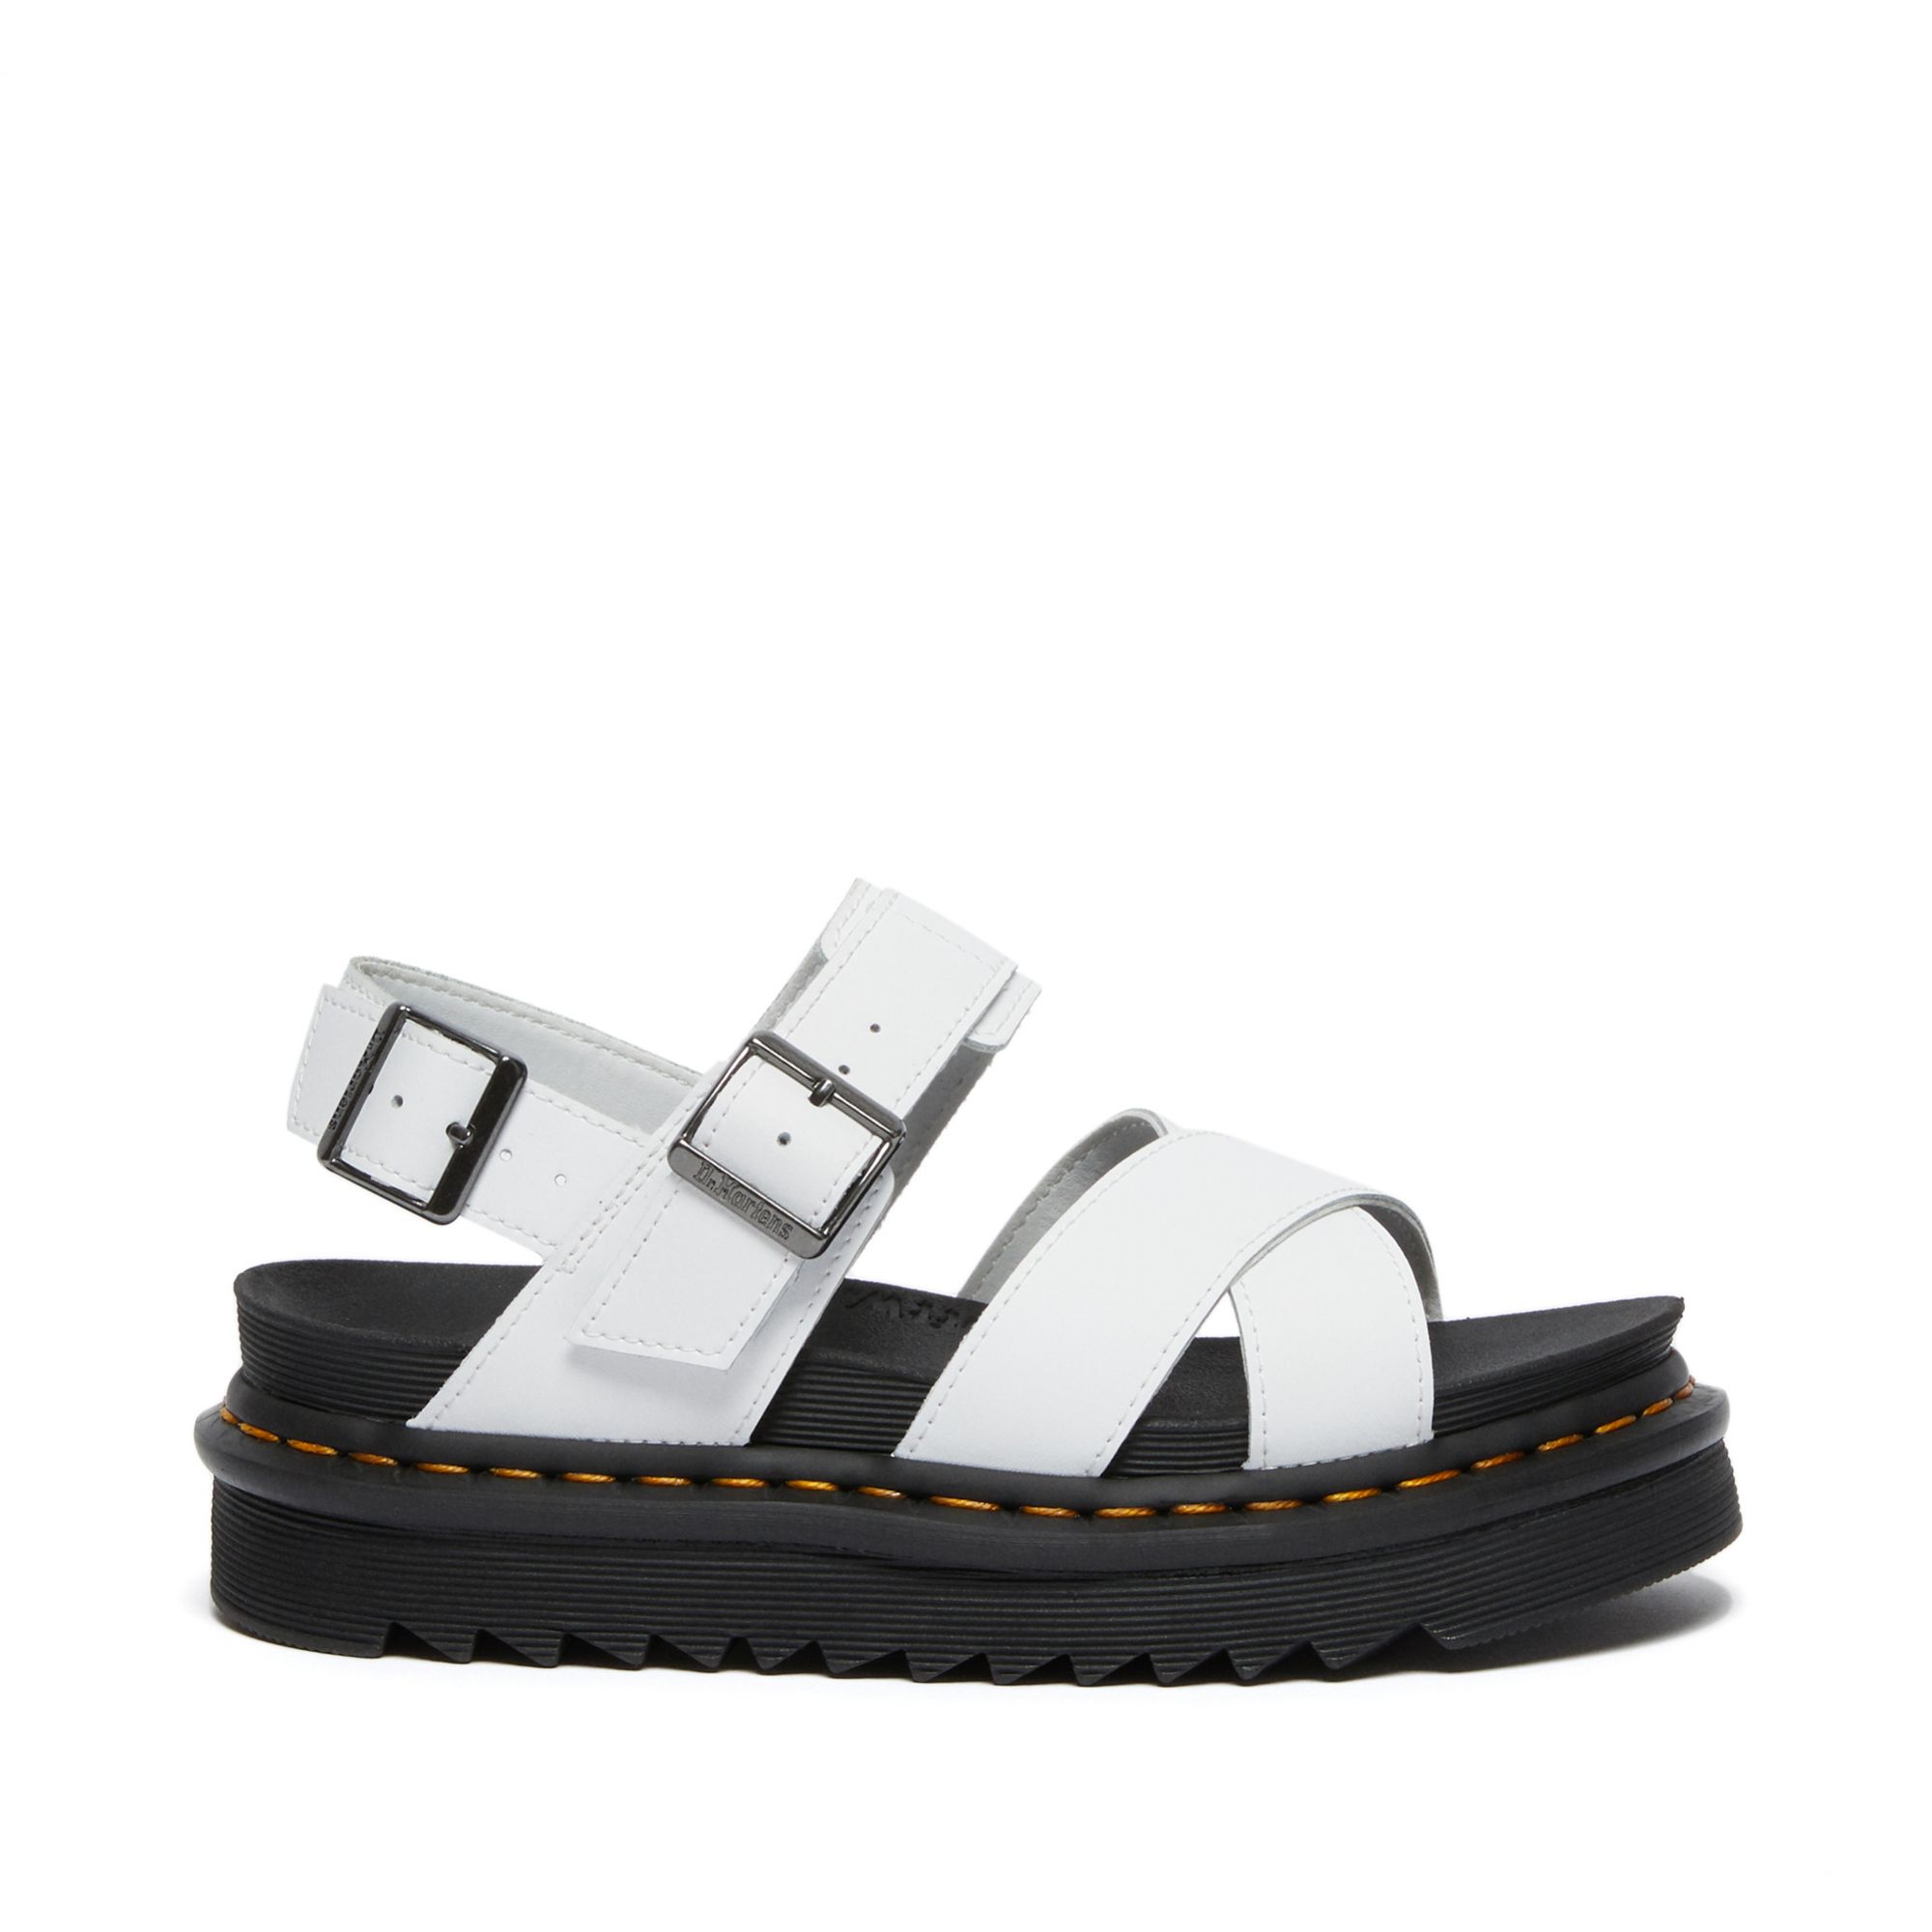 Dr. Martens Voss II Women's Leather Strap Sandals in White | NEON